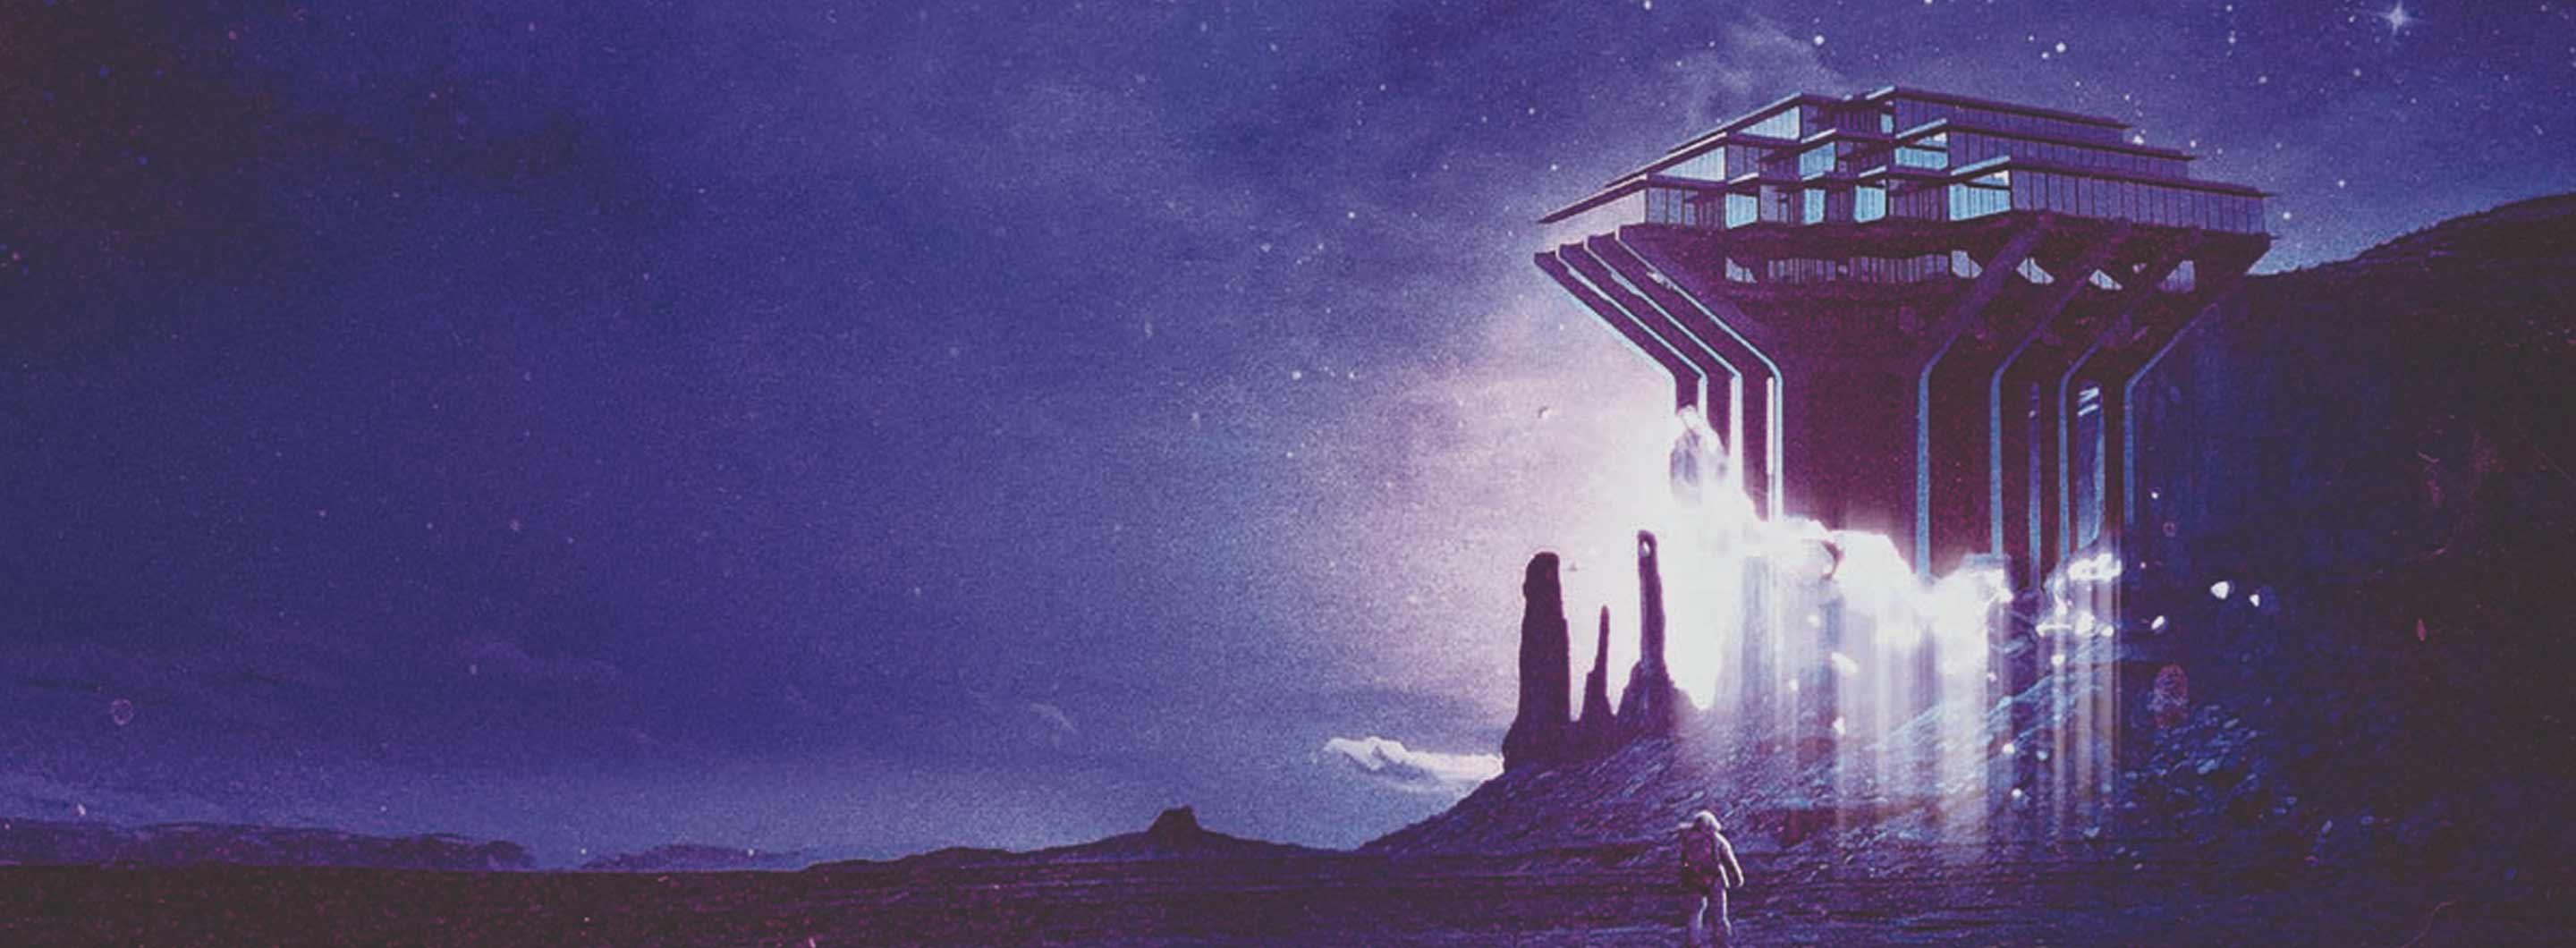 Illustration of Geisel Library as a spaceship floating over an outerworld planet